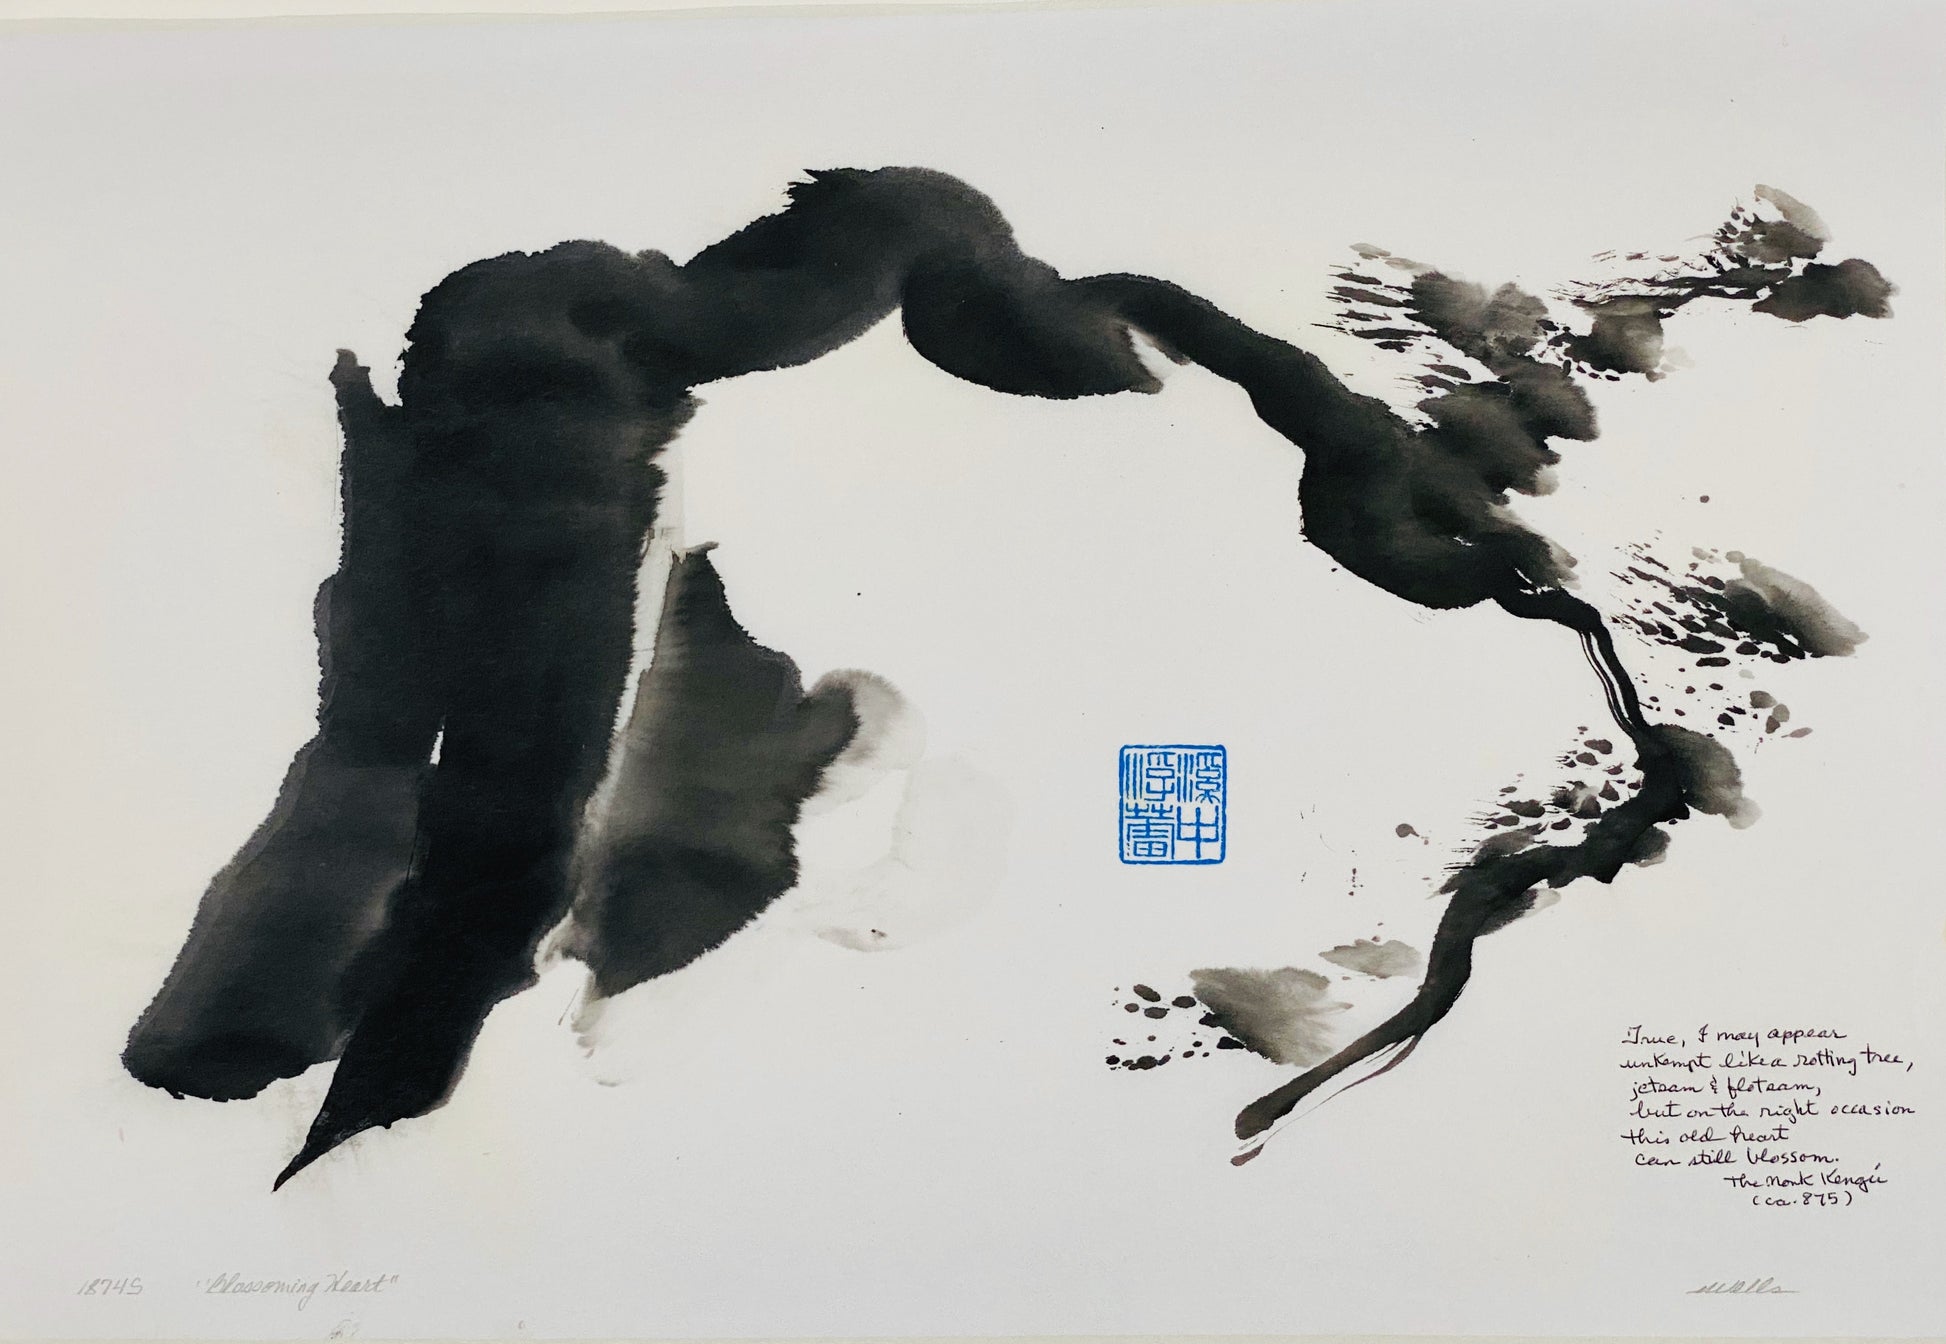 Abstract sumi e Print “My Blossoming Heart” by Marilyn Wells